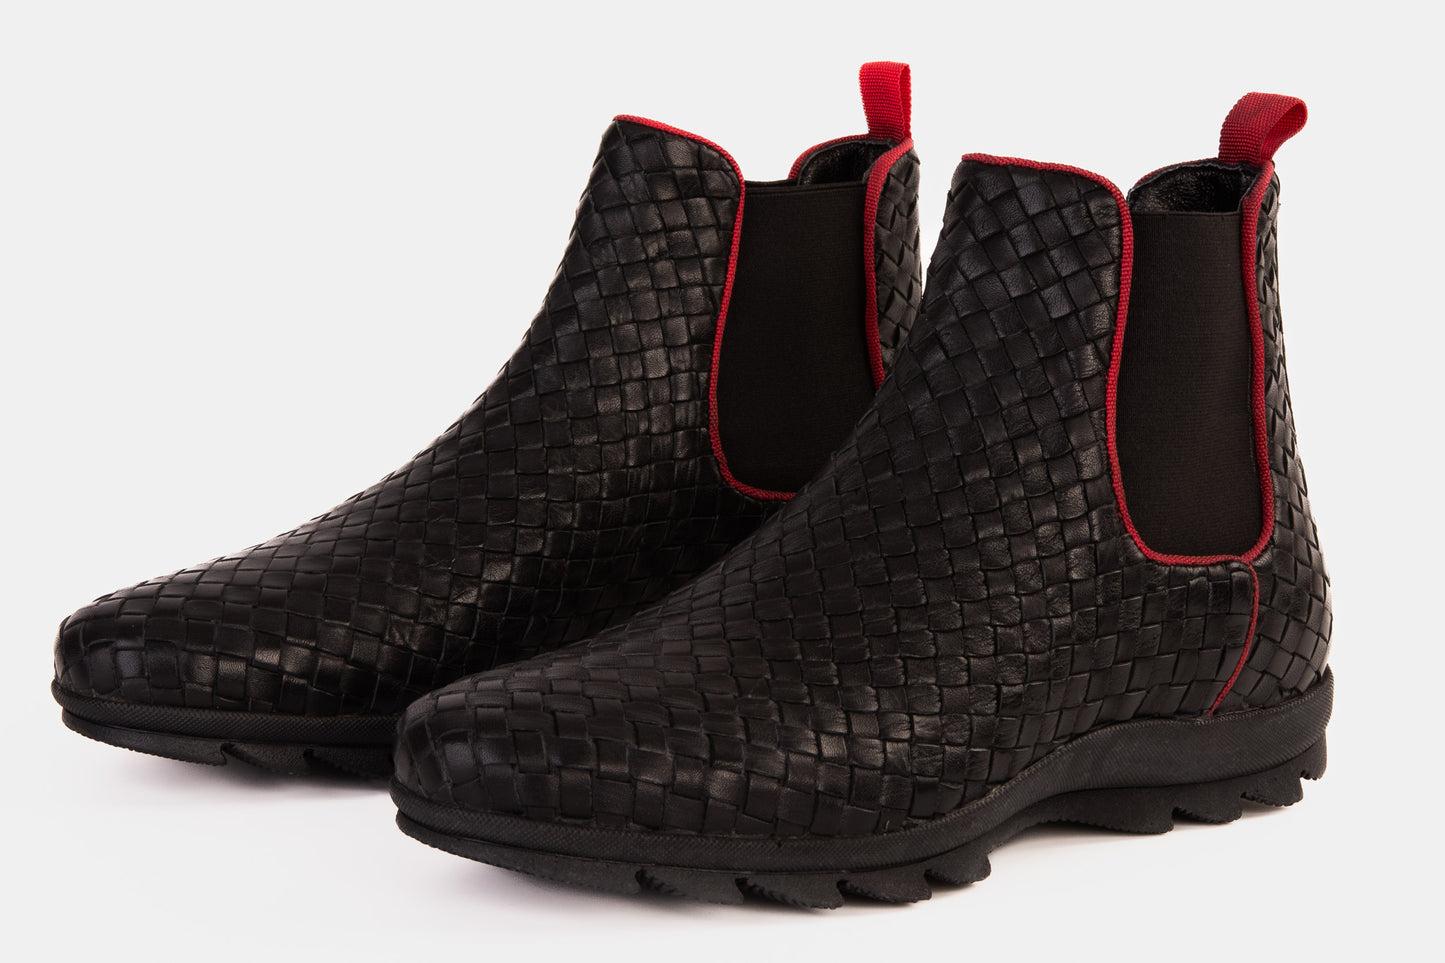 The Luxpre Black Leather Handwoven Casual Chelsea Men Boot